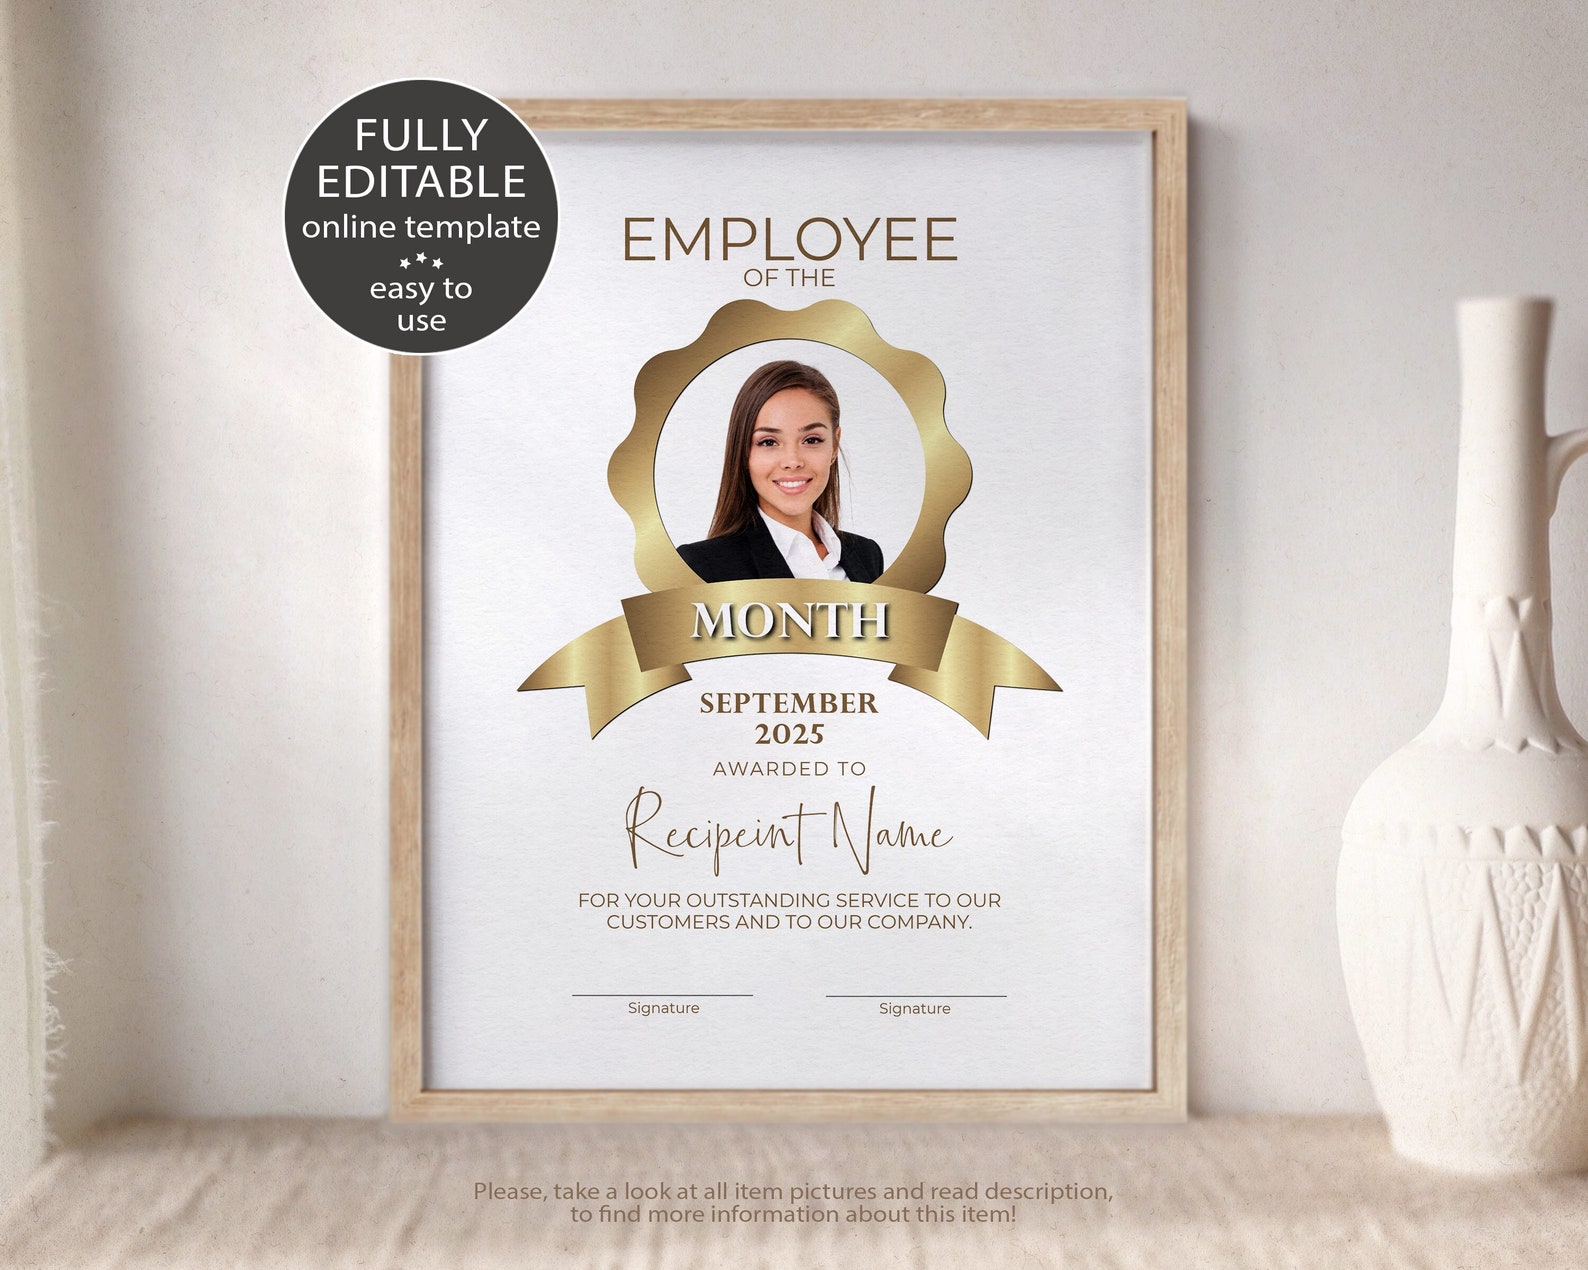 Employee of the Month Employee Appreciation Gift Company | Etsy